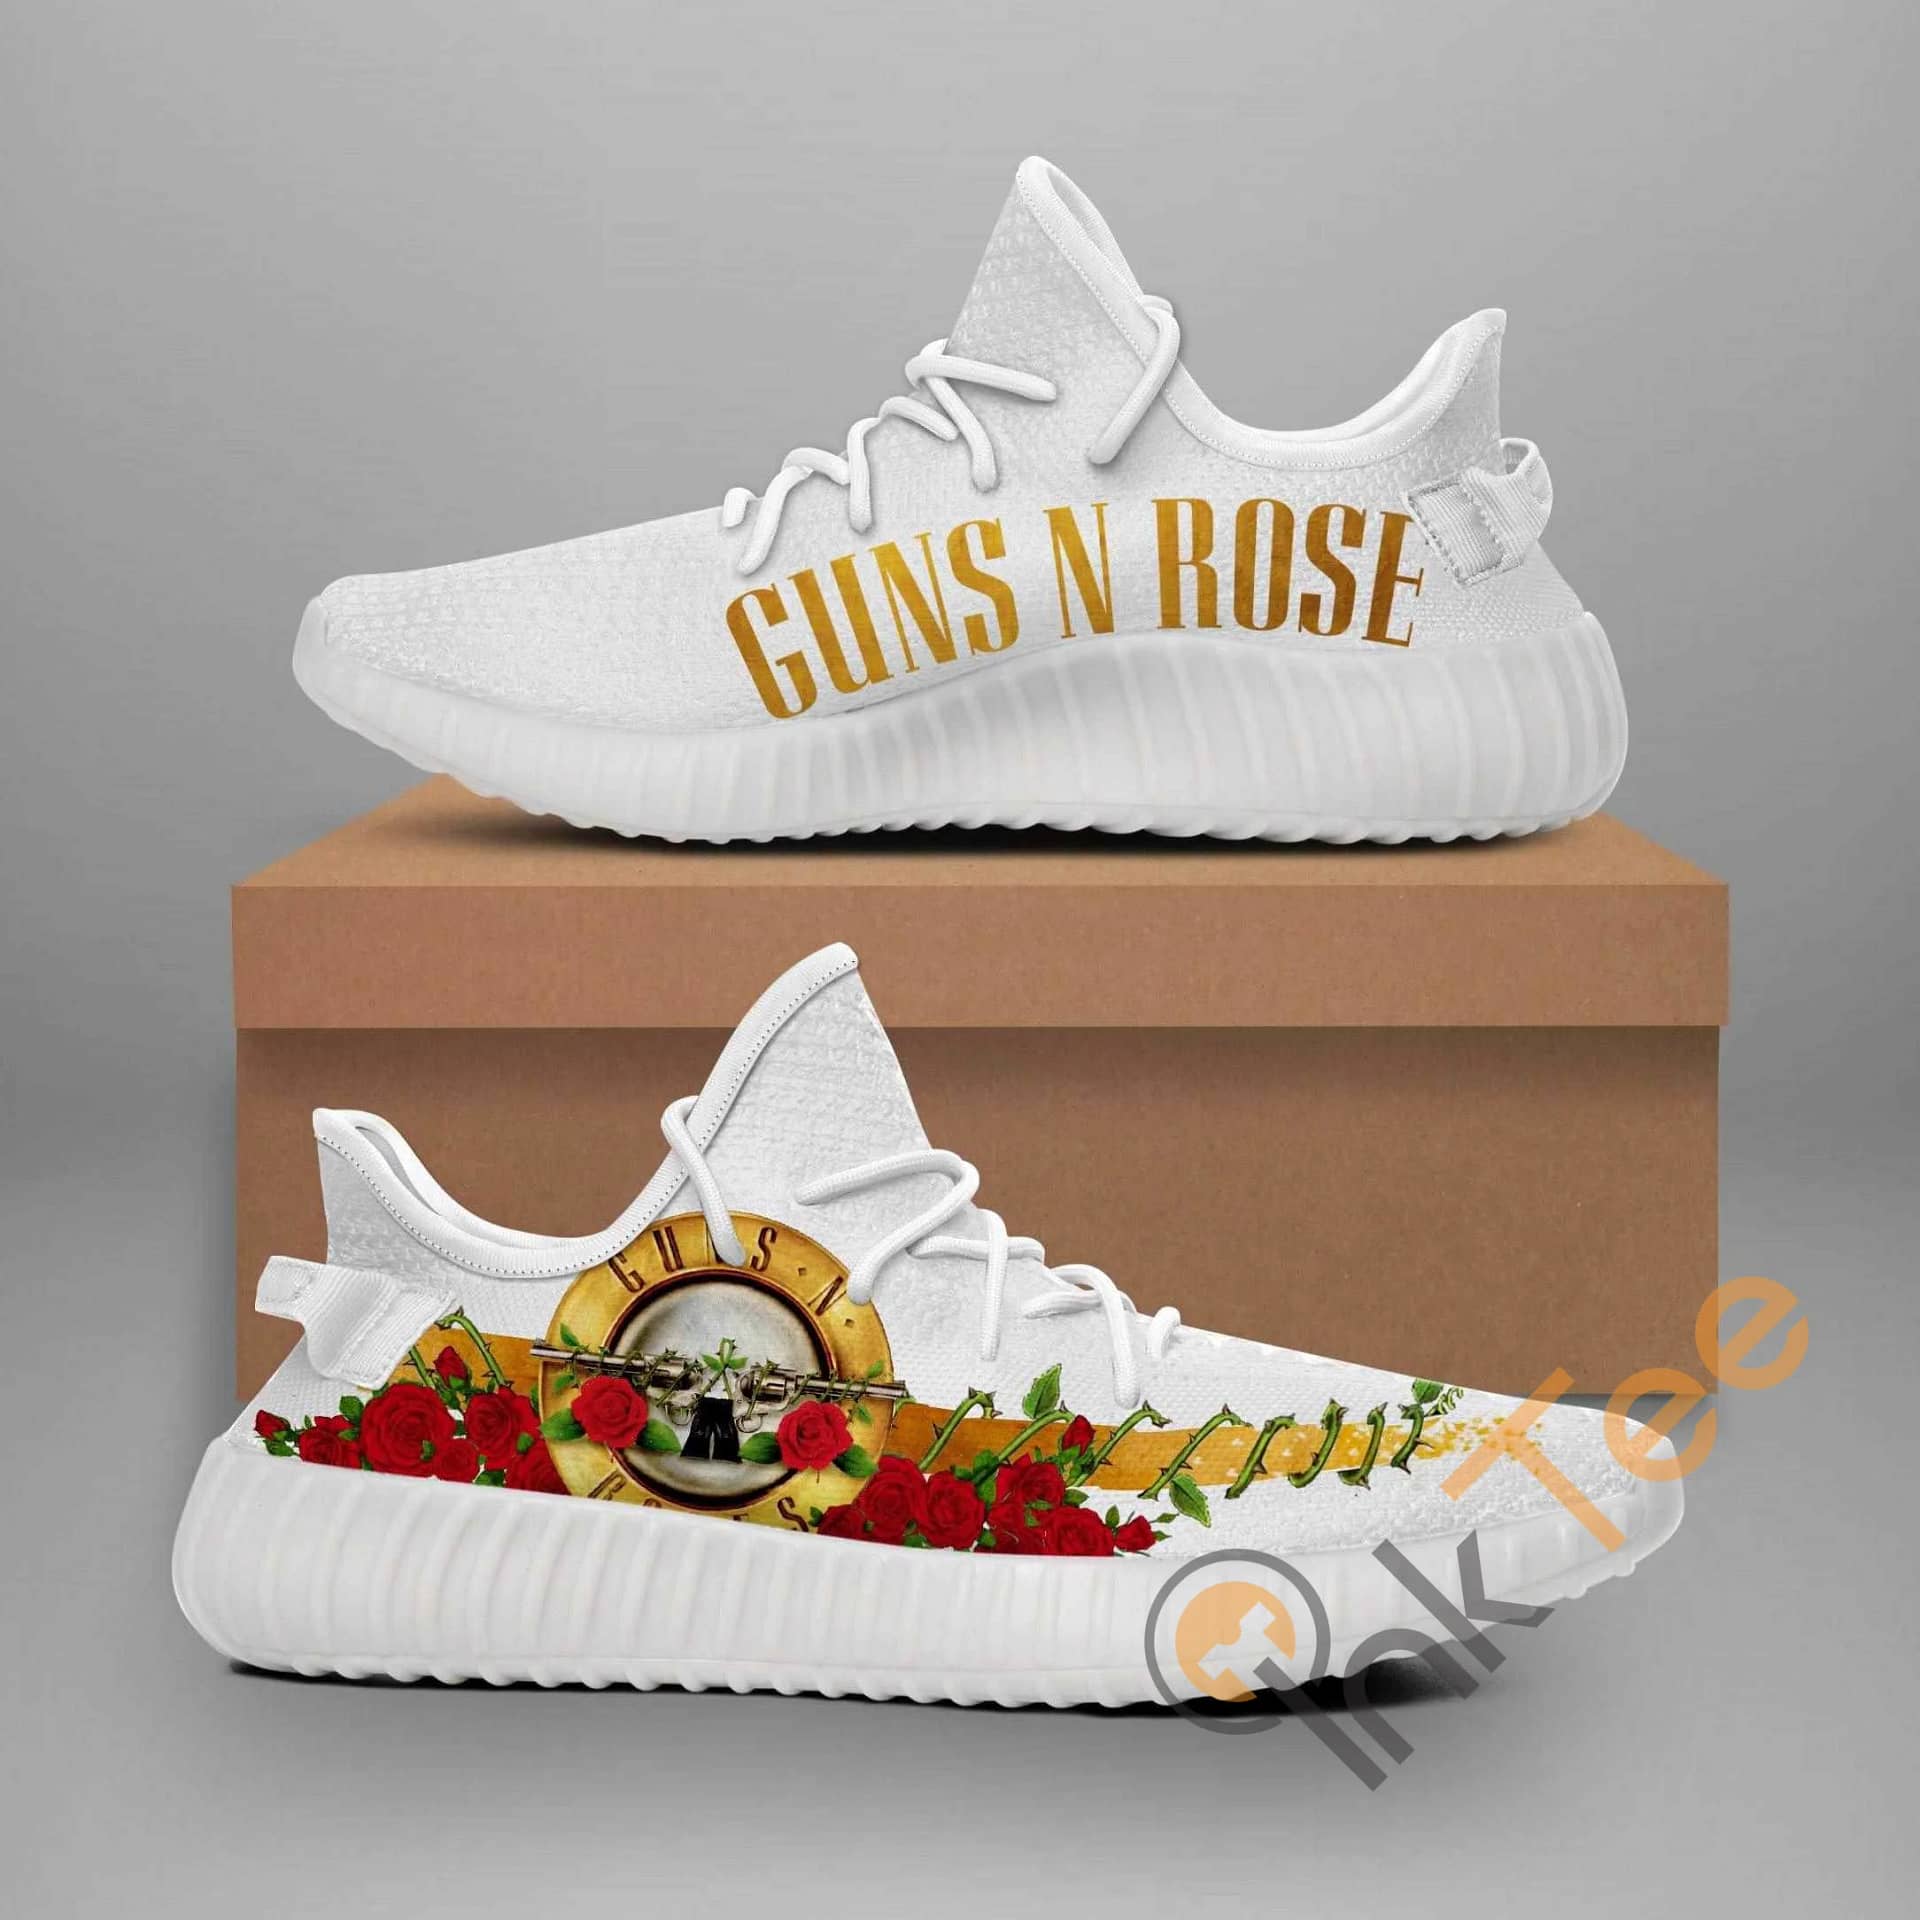 Guns N Roses Band Amazon Best Selling Yeezy Boost